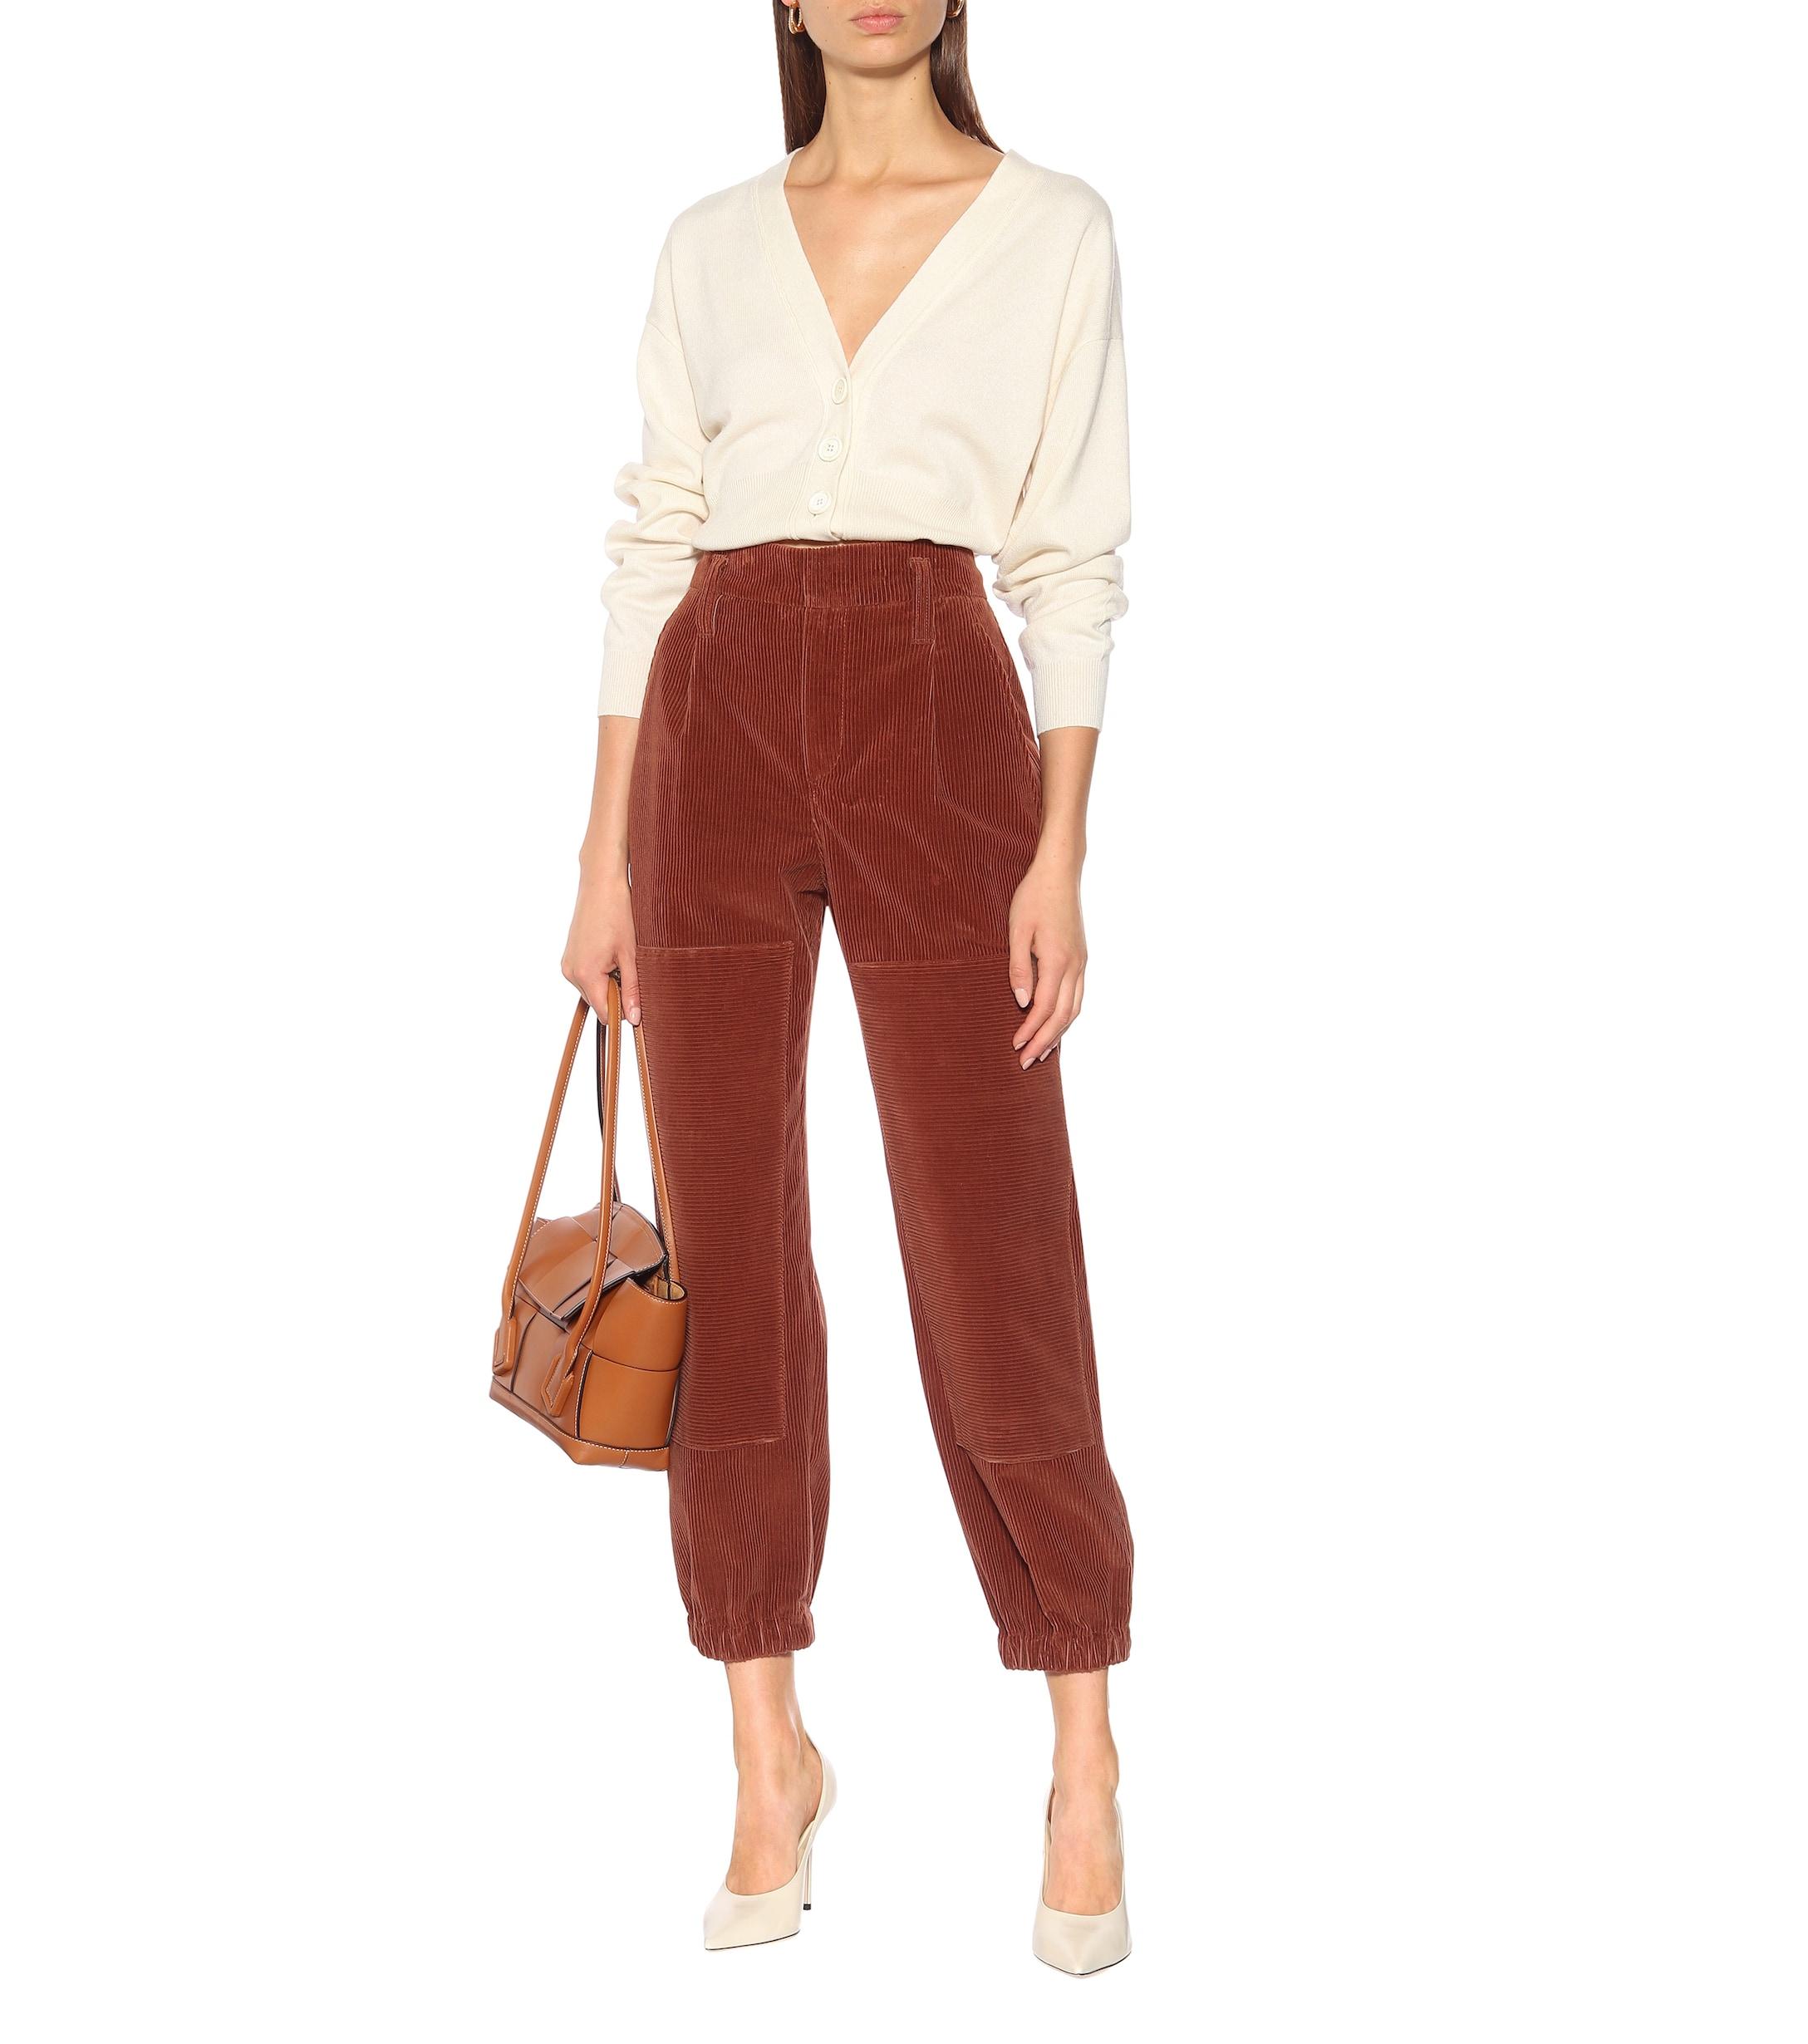 Brunello Cucinelli High-rise Corduroy Pants in Brown - Lyst